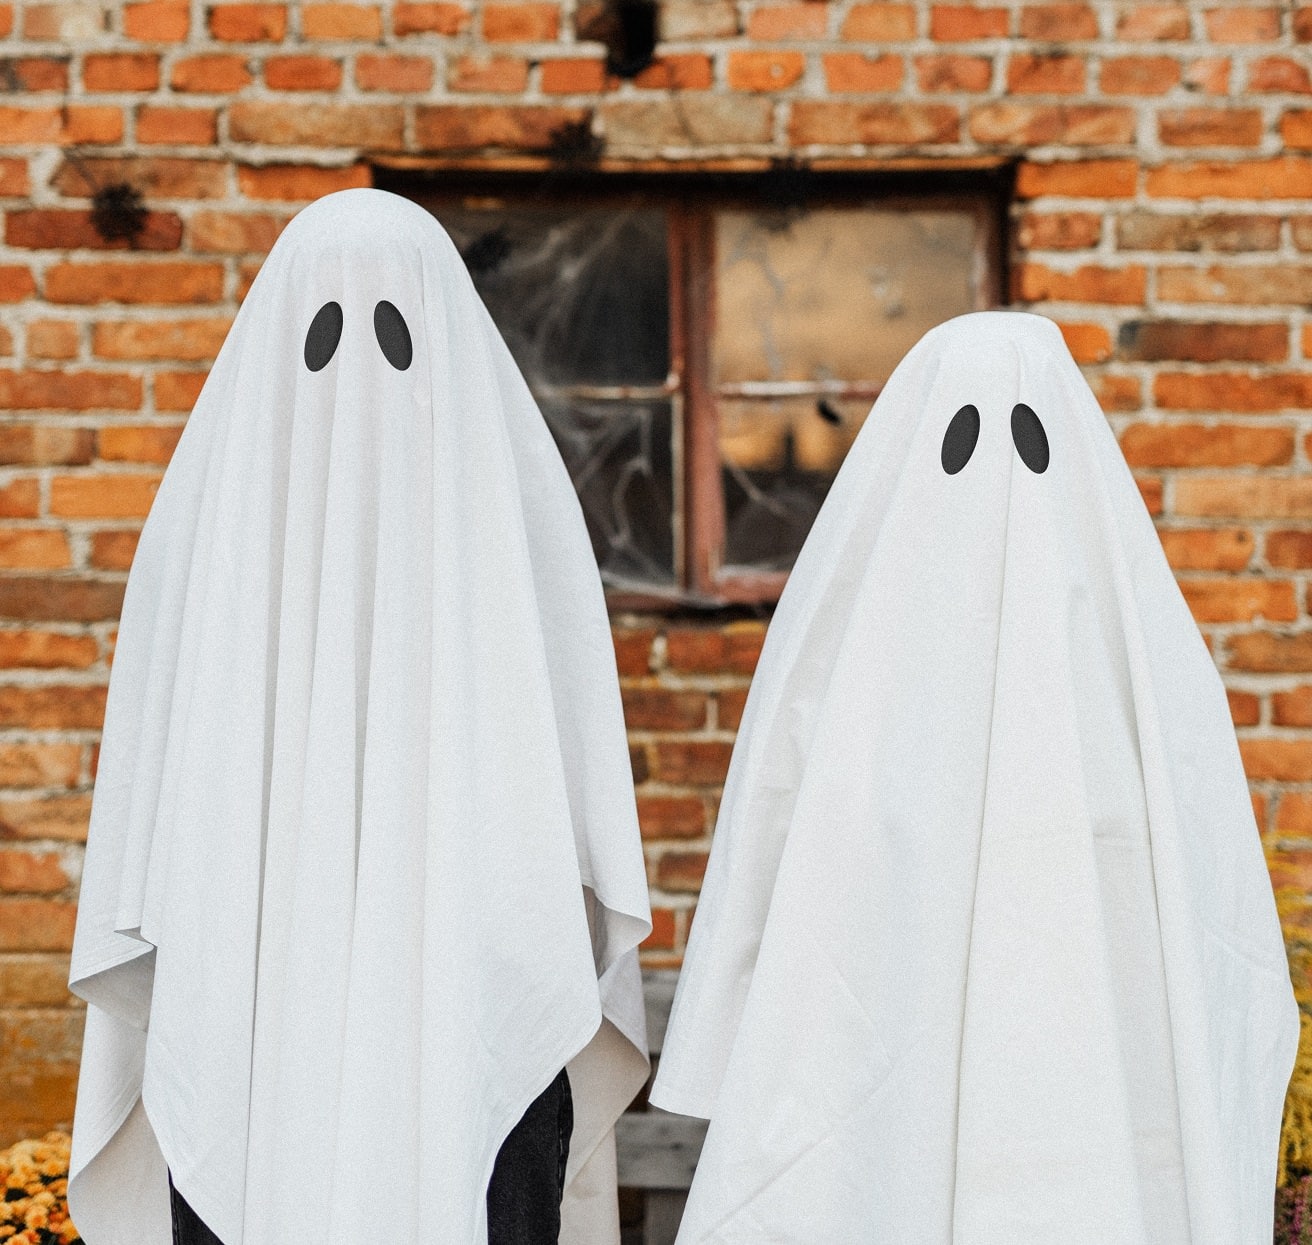 Children standing in front of a brick wall wearing homemade ghost costumes